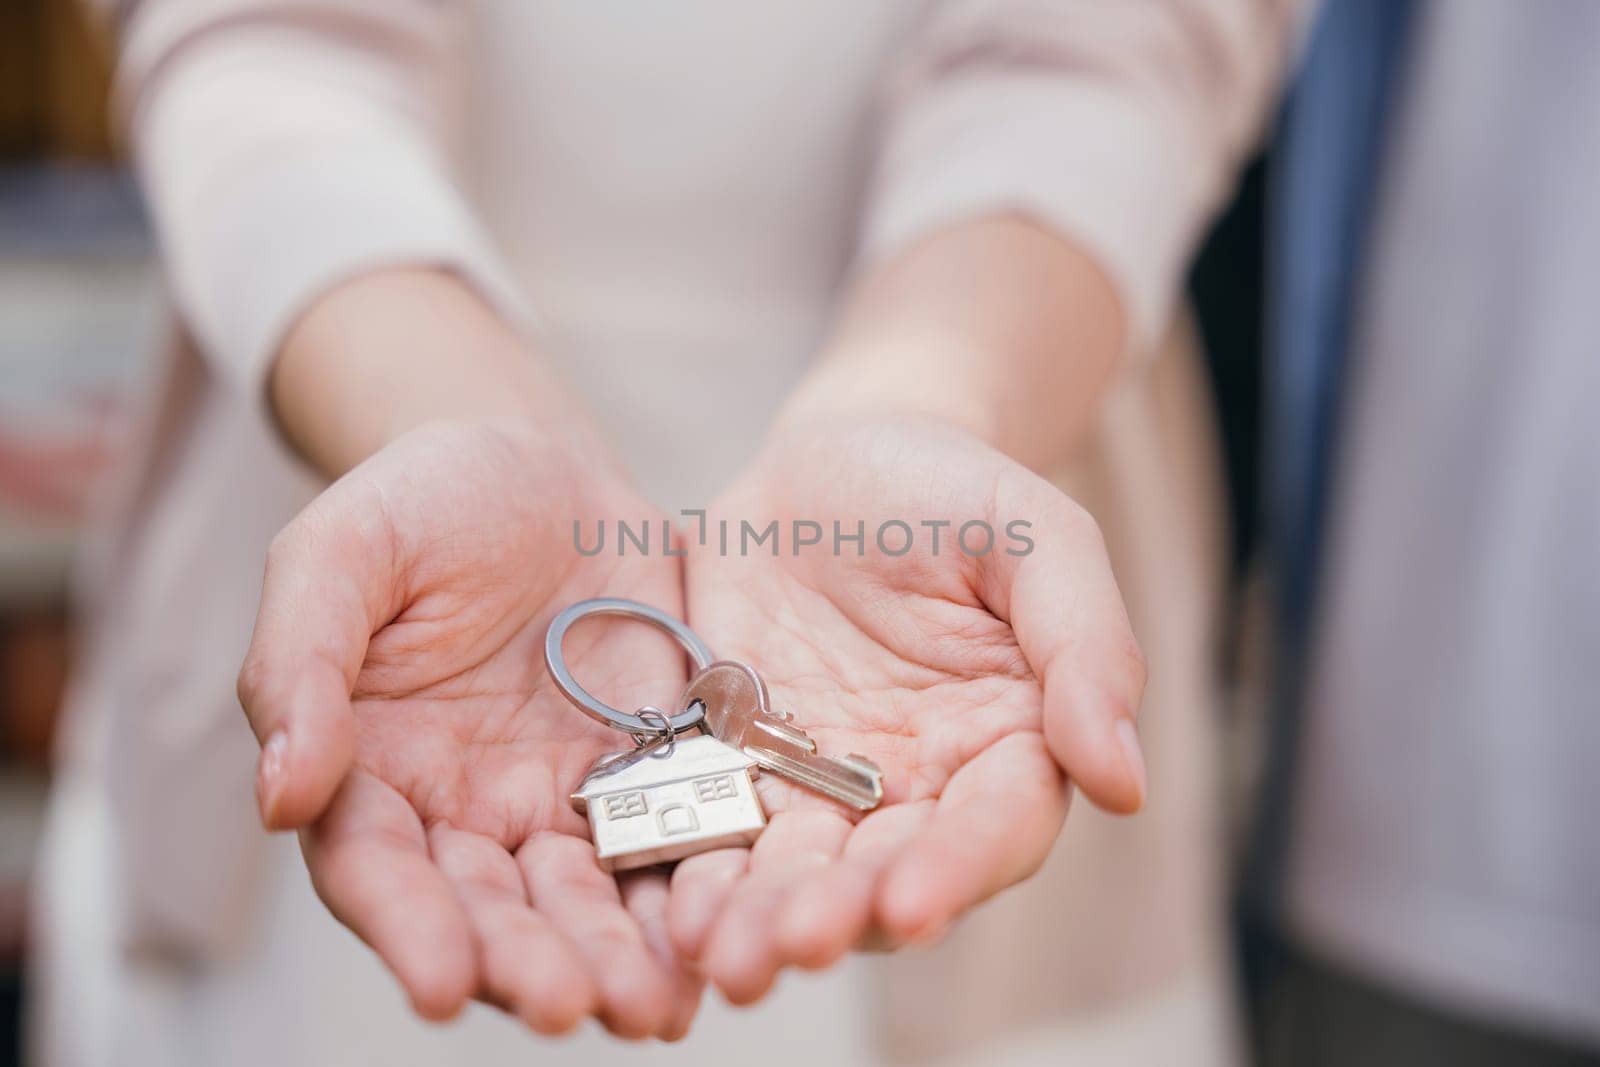 Woman landlord's hand holds keys symbolizing property deal achievement. Real estate owner giving keys signifies successful home buying tenant security and happiness. Give me keys to new beginnings by Sorapop